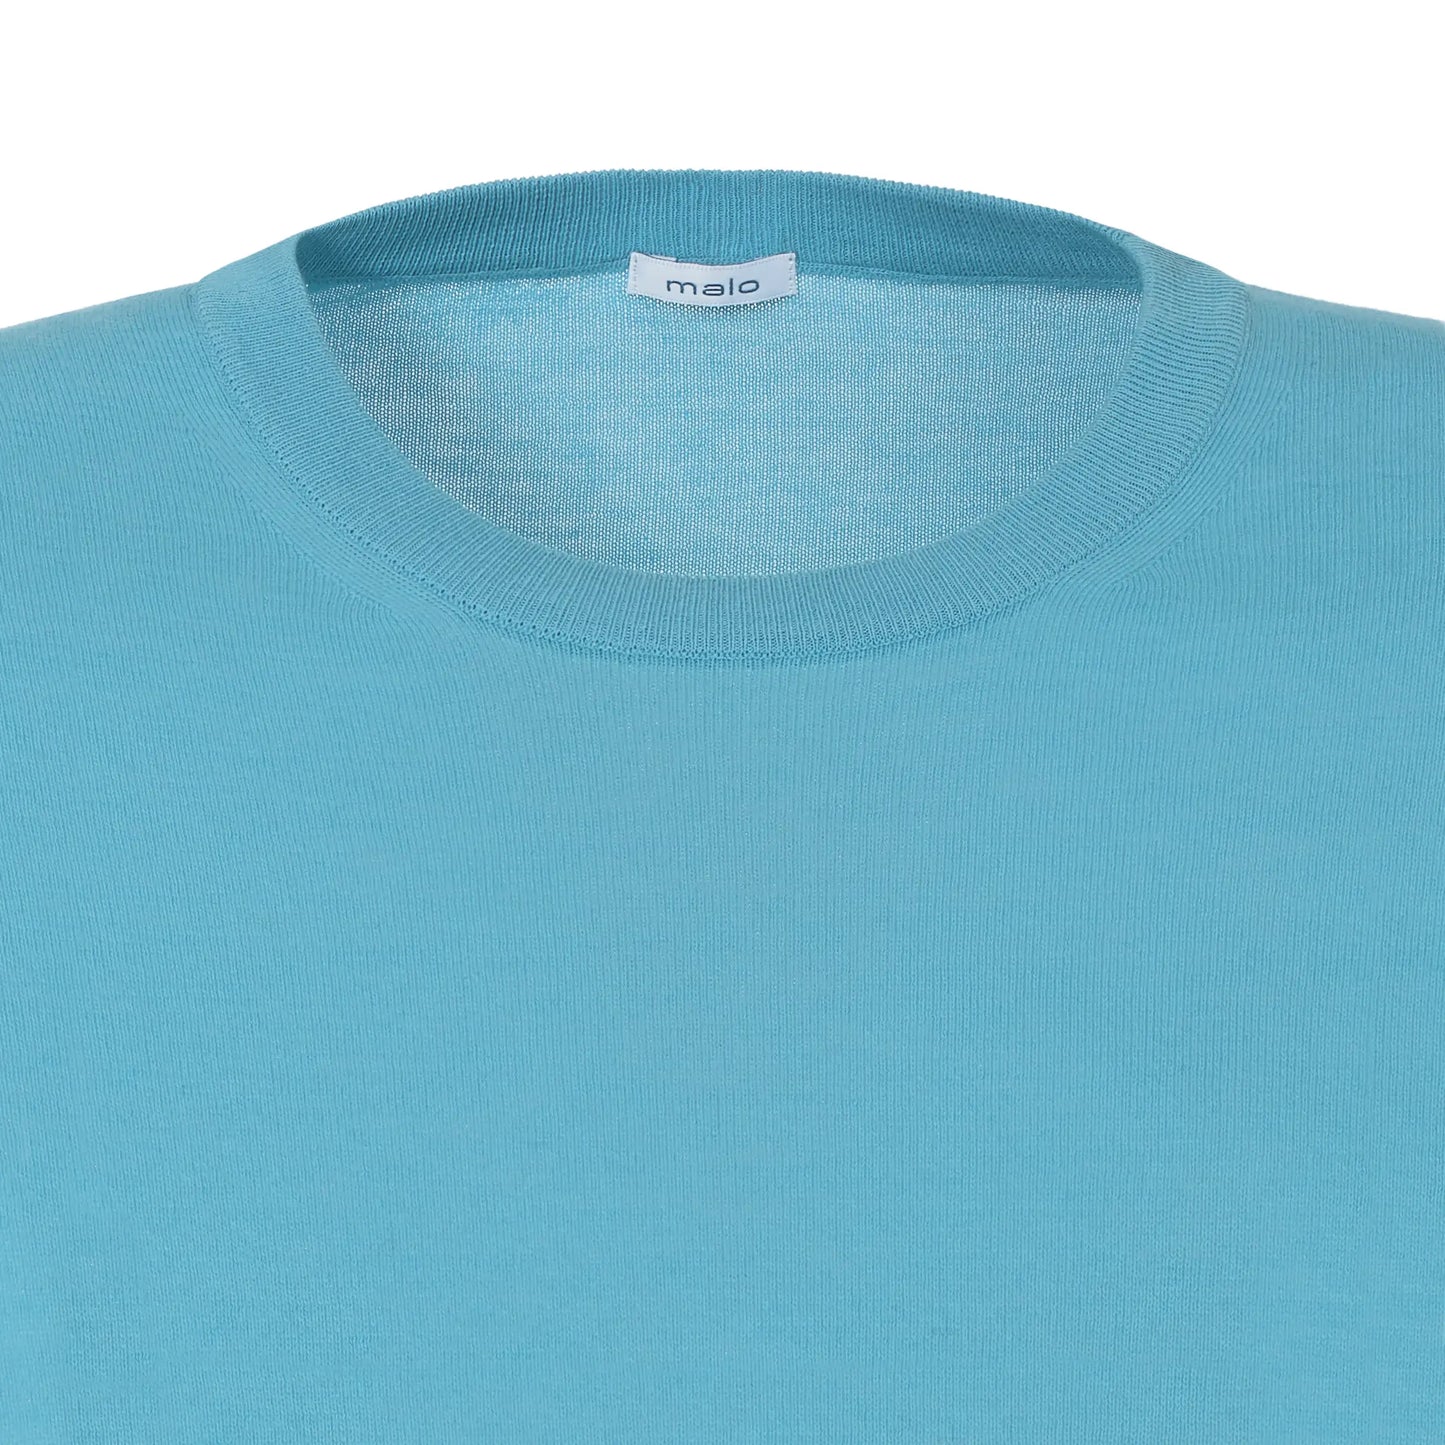 Cotton T-Shirt Sweater in Sky Blue